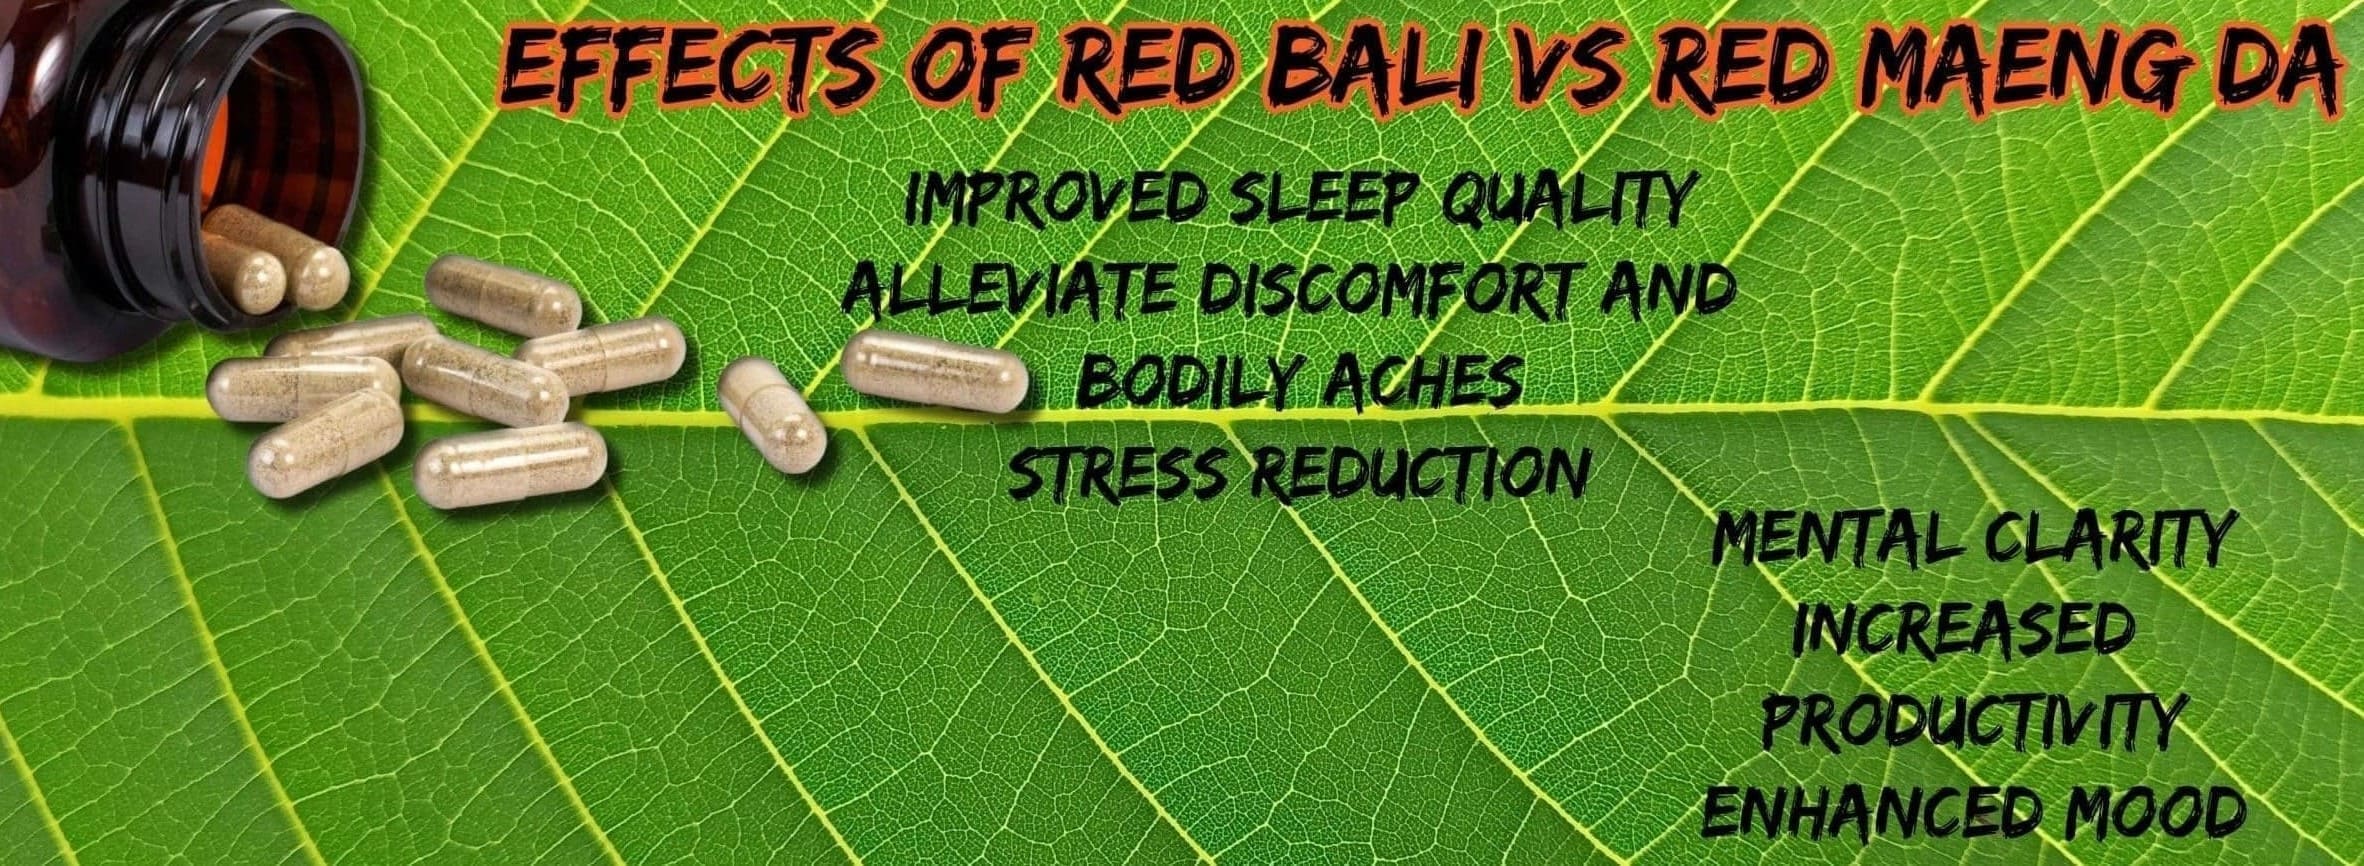 image of red bali vs red maeng da effects